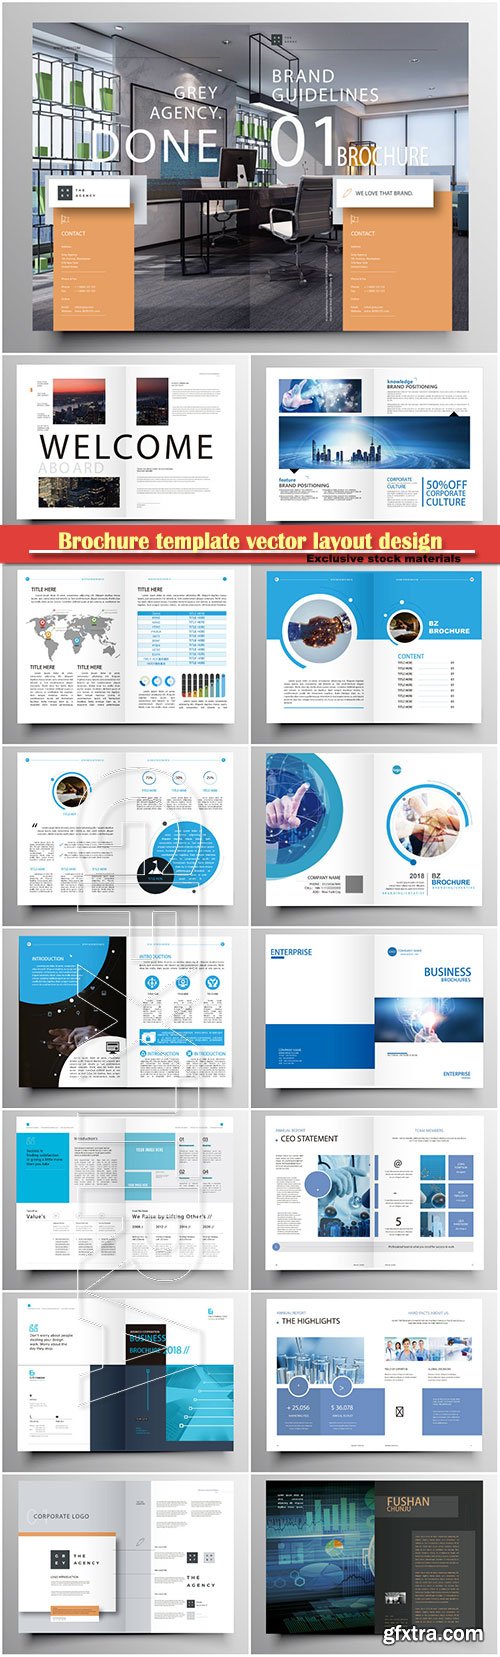 Brochure template vector layout design, corporate business annual report, magazine, flyer mockup # 131